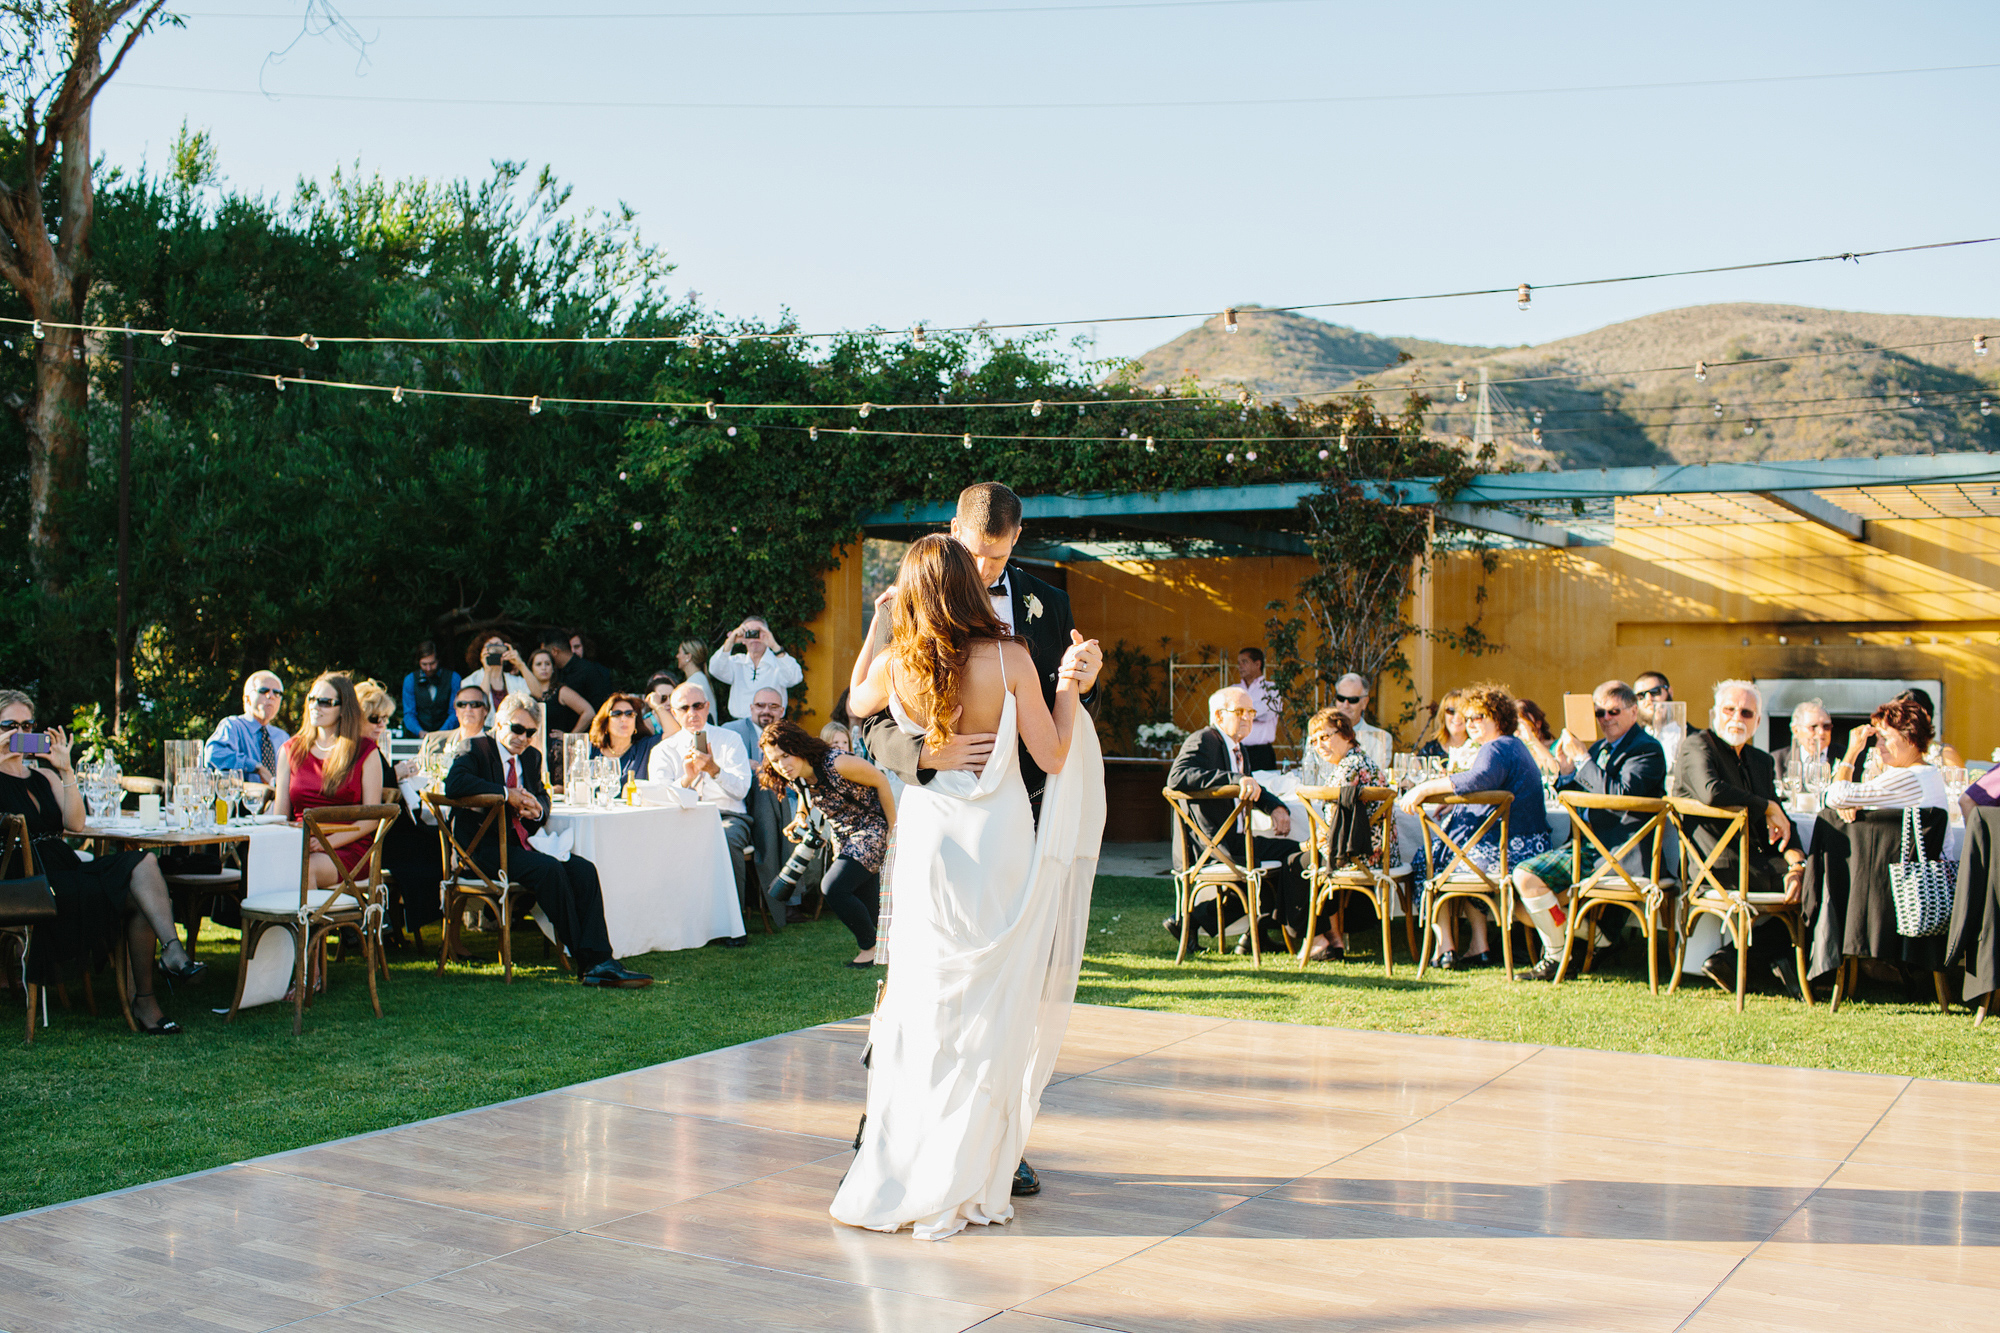 The first dance at Rancho del Cielo. 